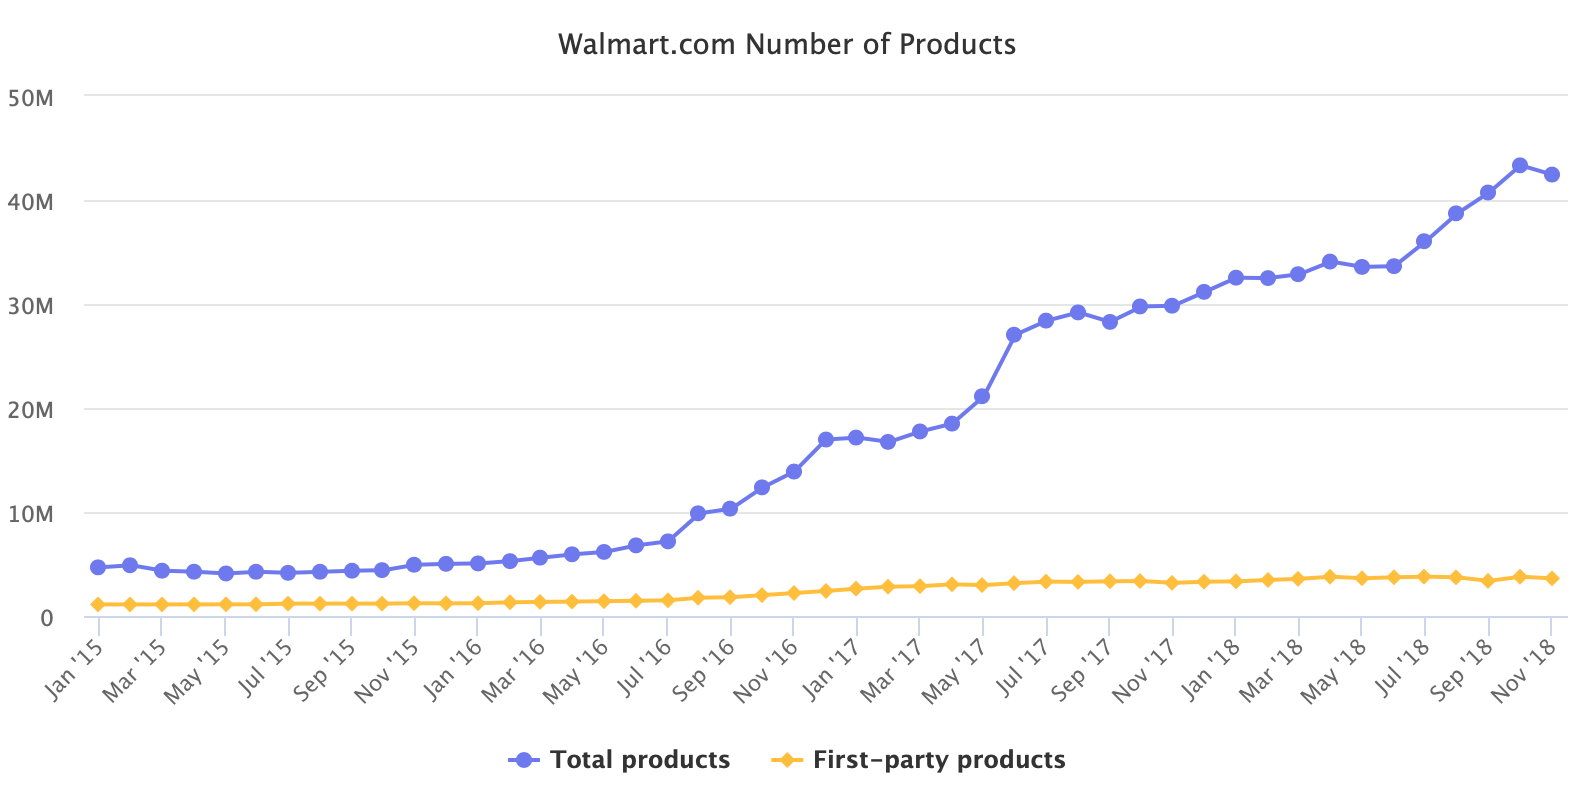 Walmart.com Number of Products